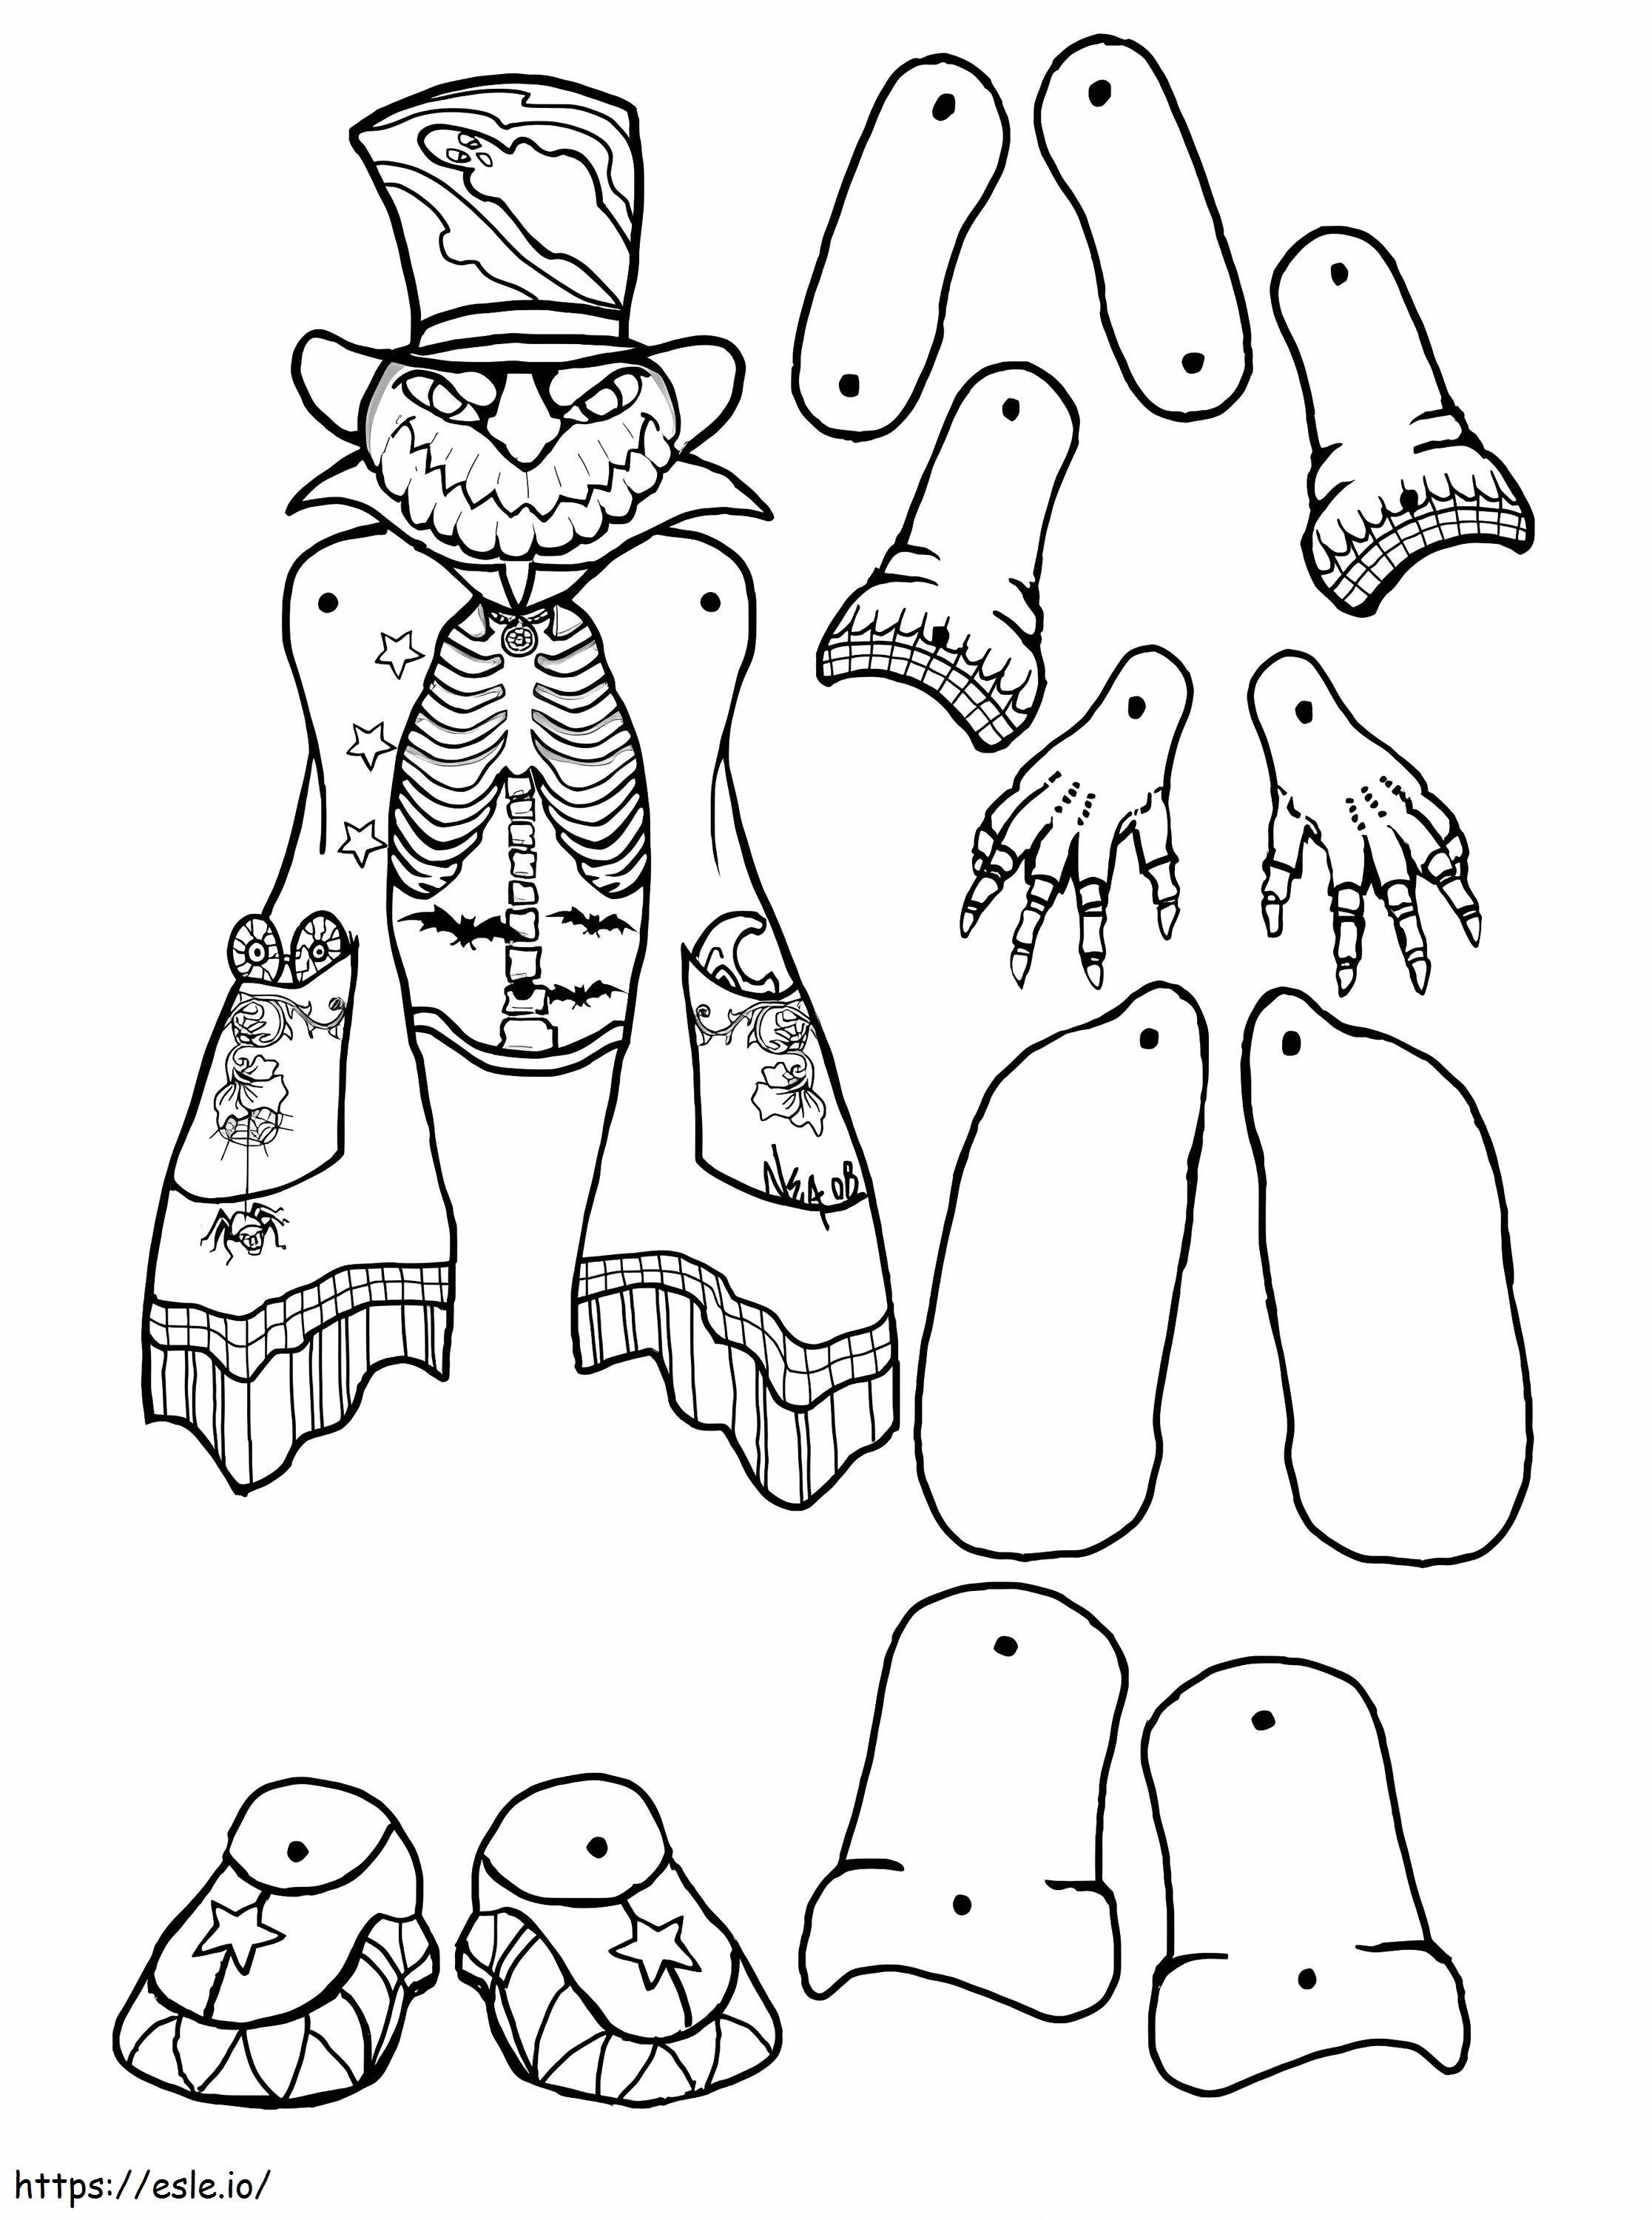 Pumpkin Head Puppet coloring page